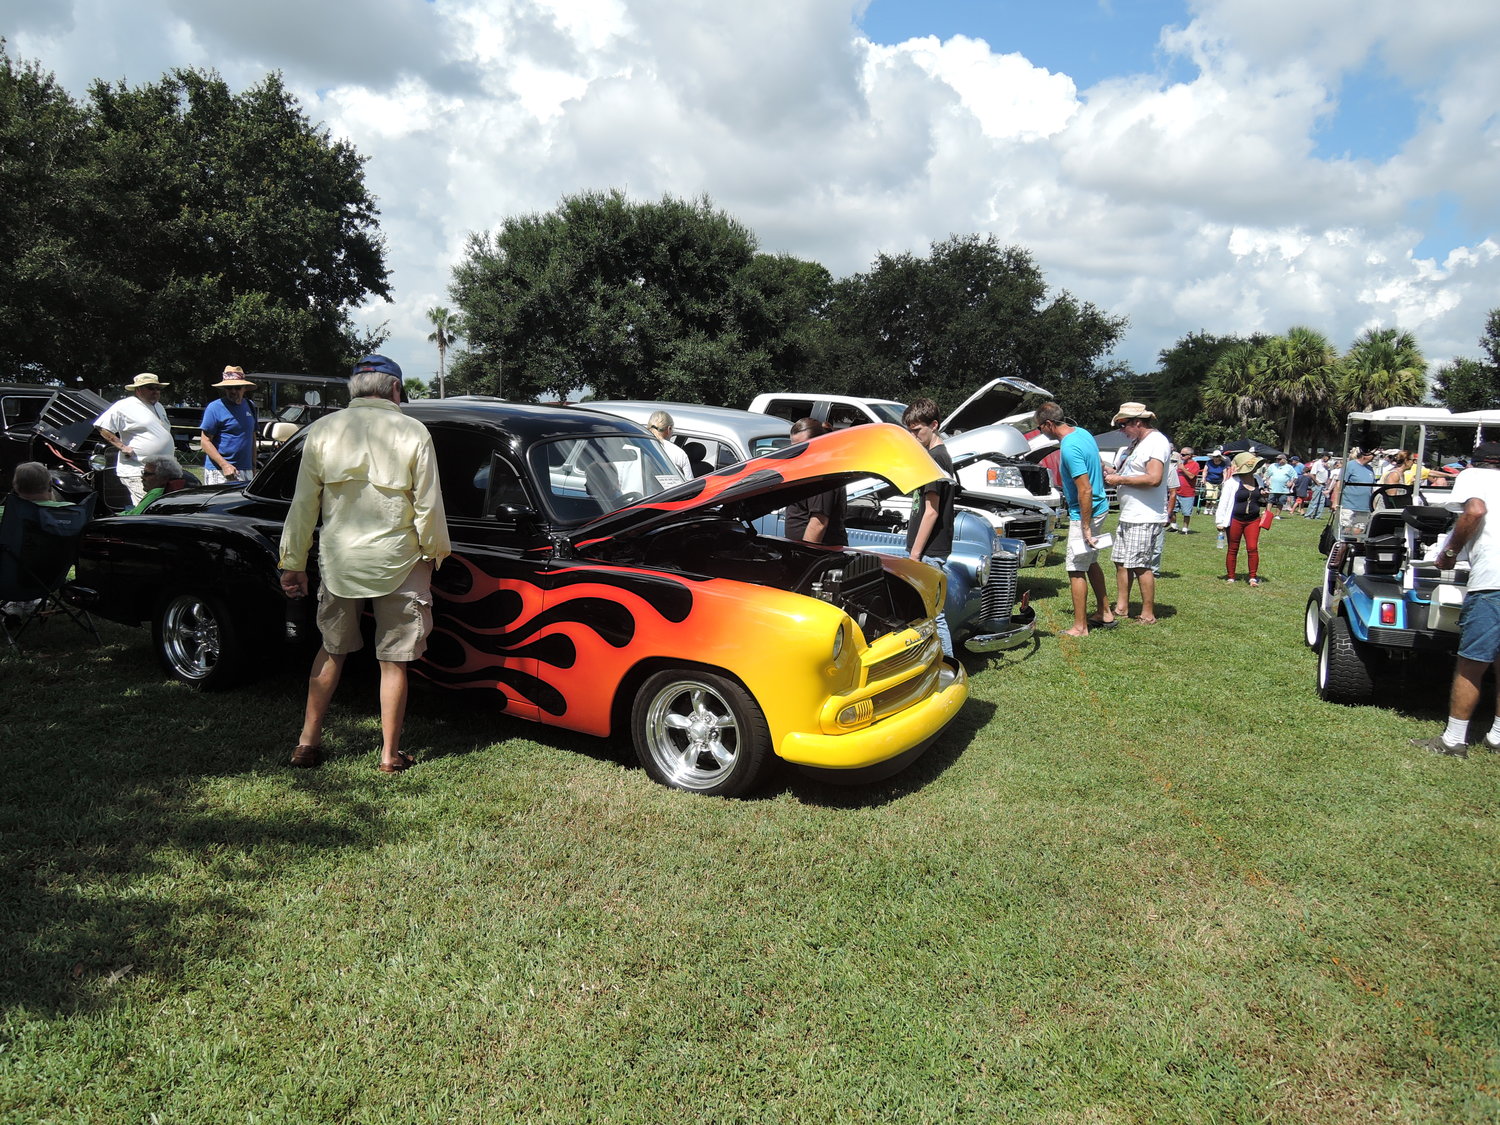 On Saturday, the festival features a car and motorcycle show.